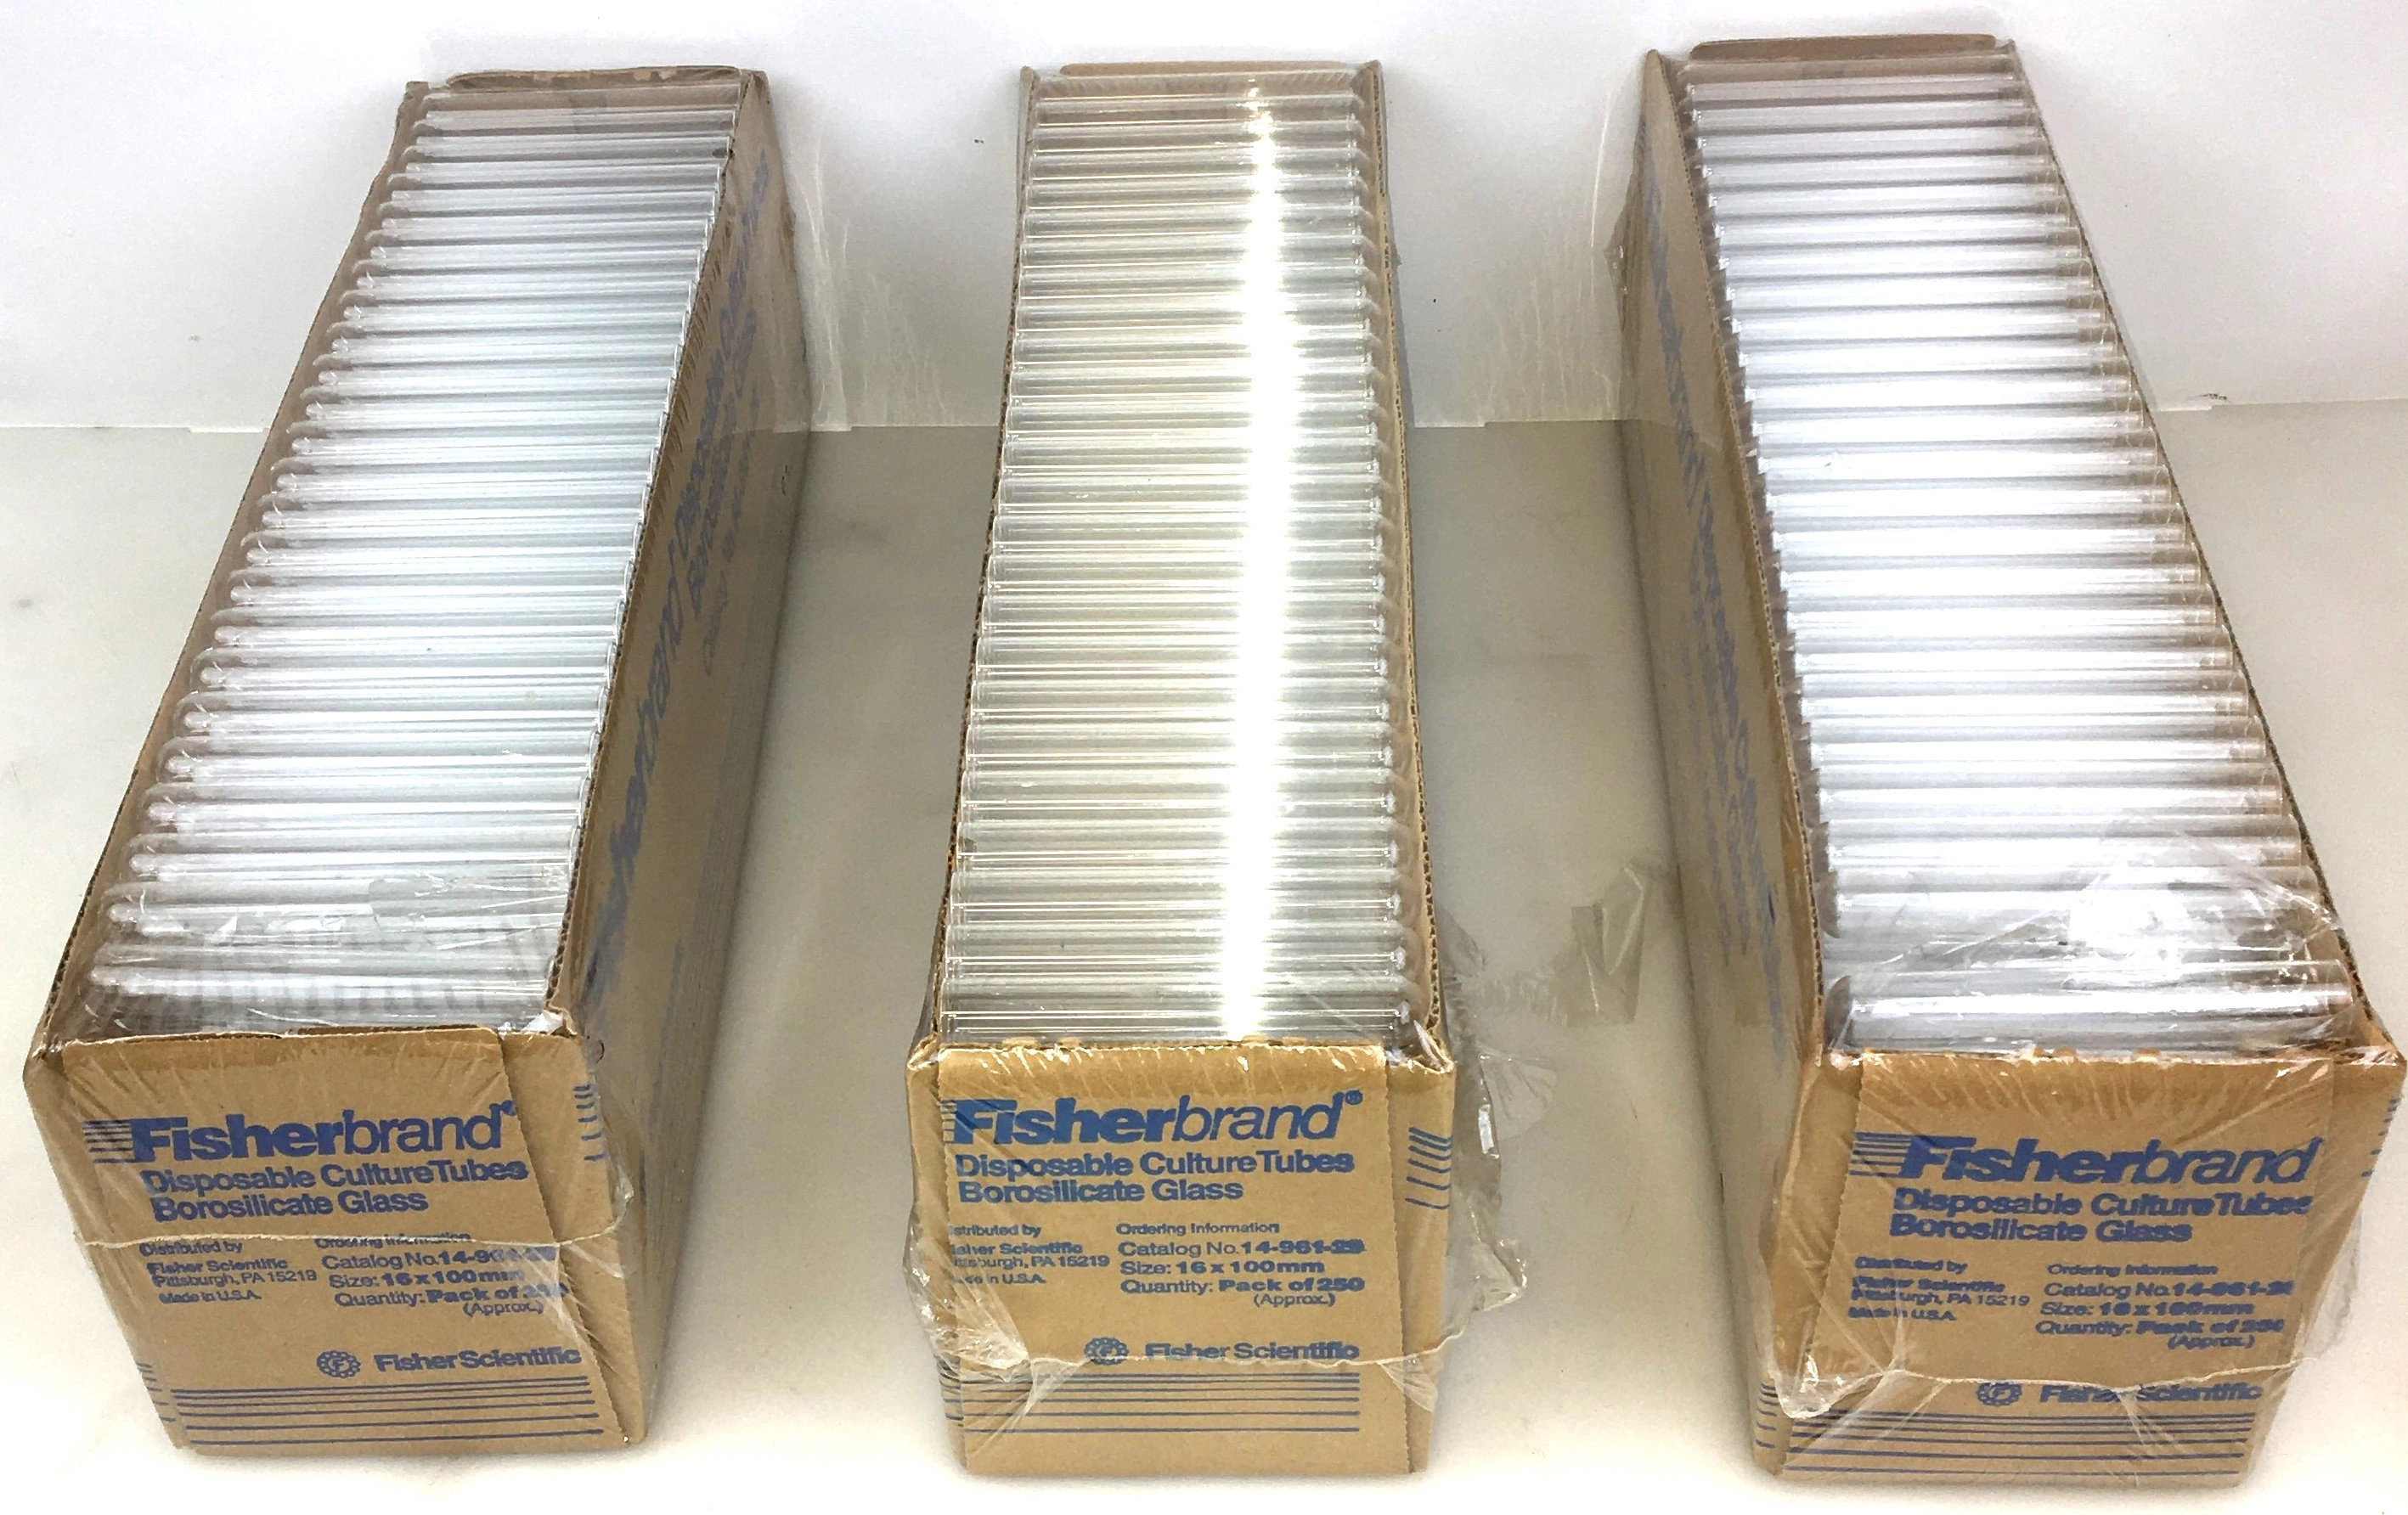 Fisherbrand 14-961-29 Disposable Culture Tube - 16 x 100mm (Box of 250)